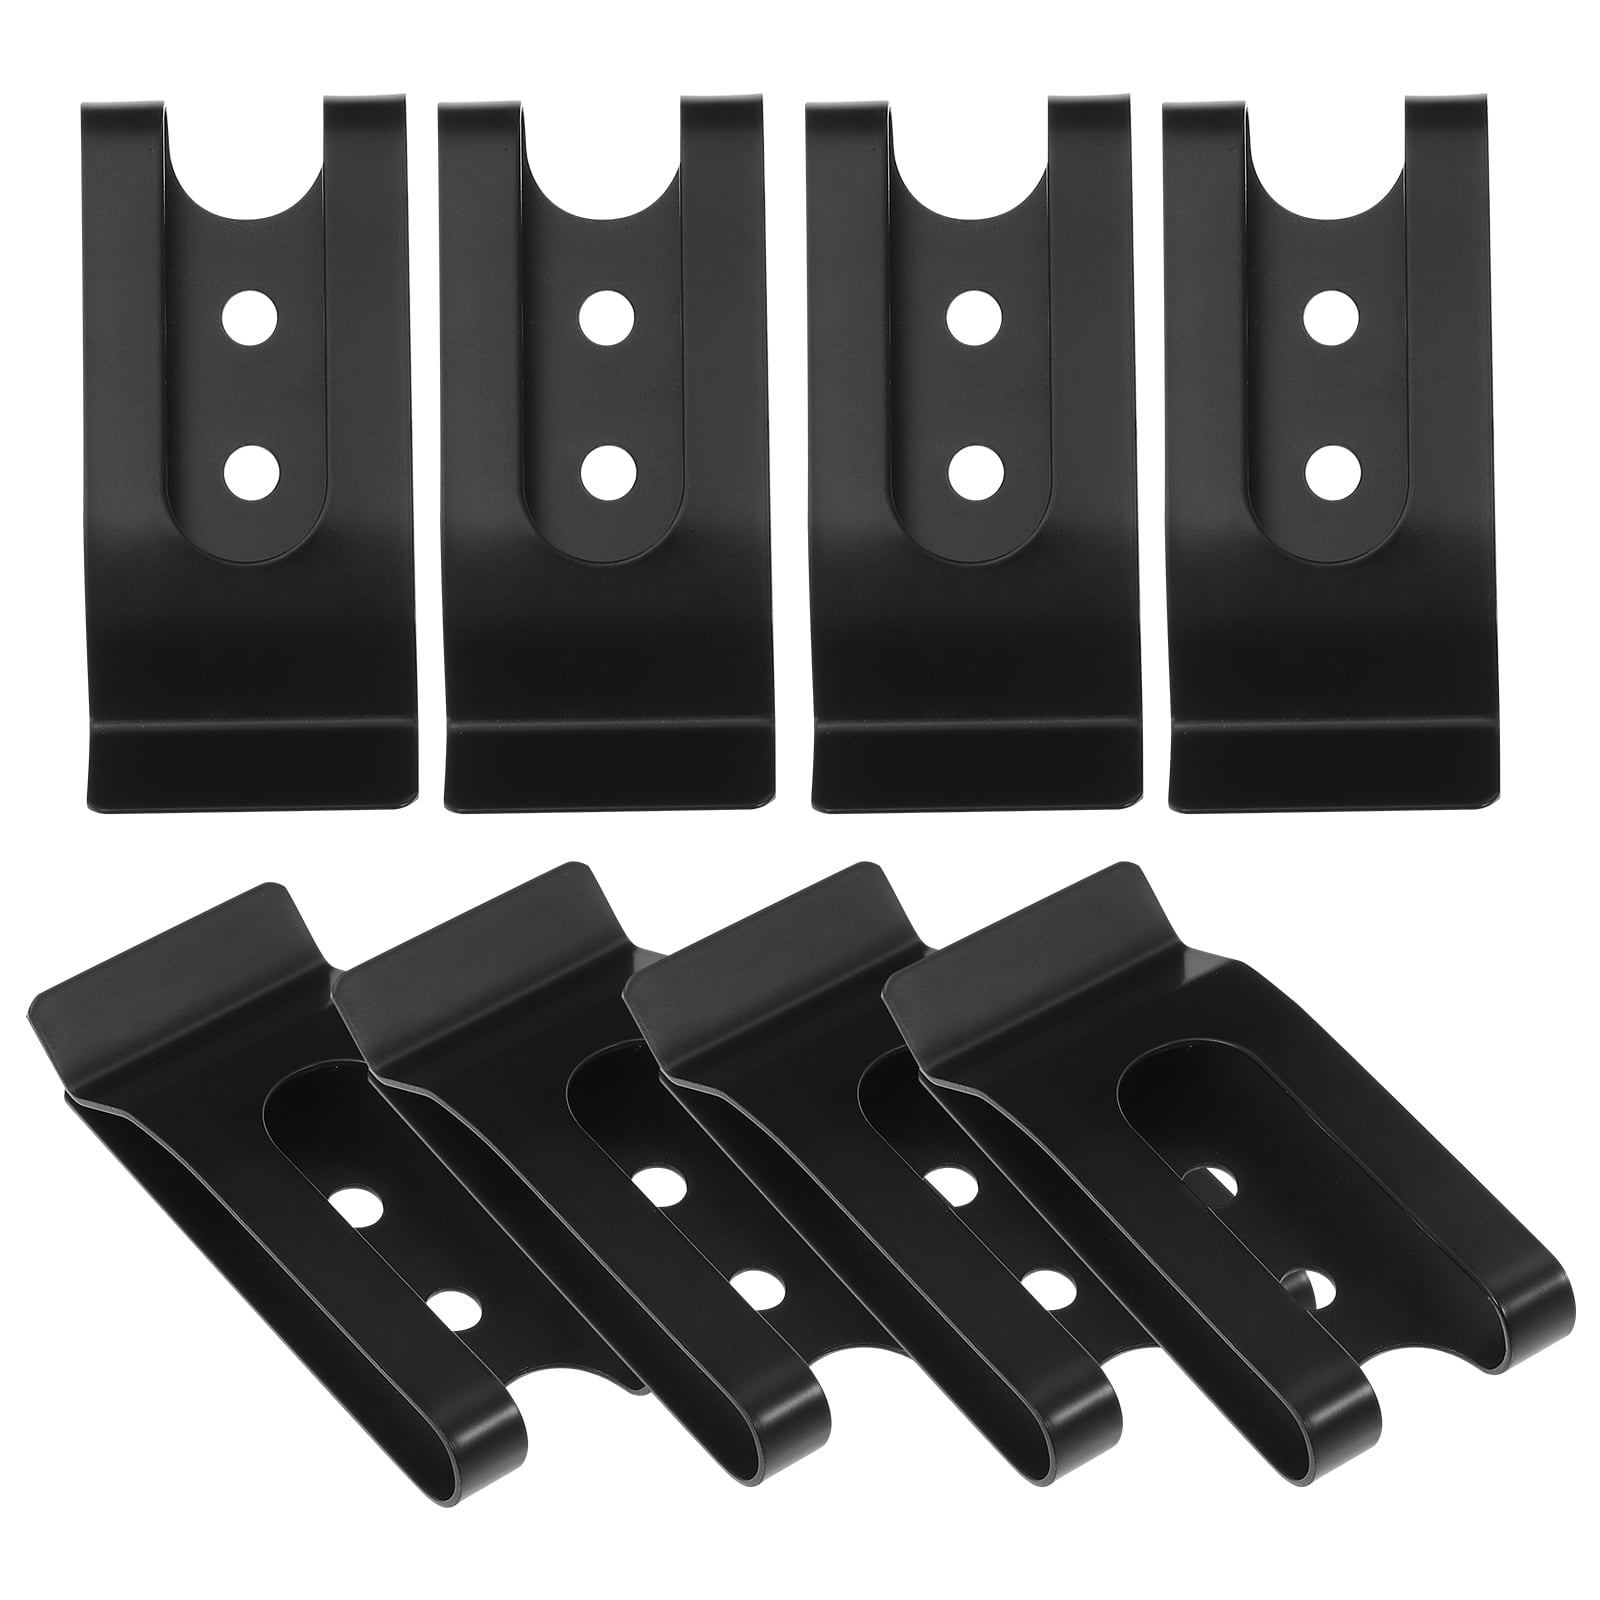 Black Metal Belt Clip for Leather Craft Sheath Wallet Pouch Double Holes  Holster Clasp Clamp Buckle